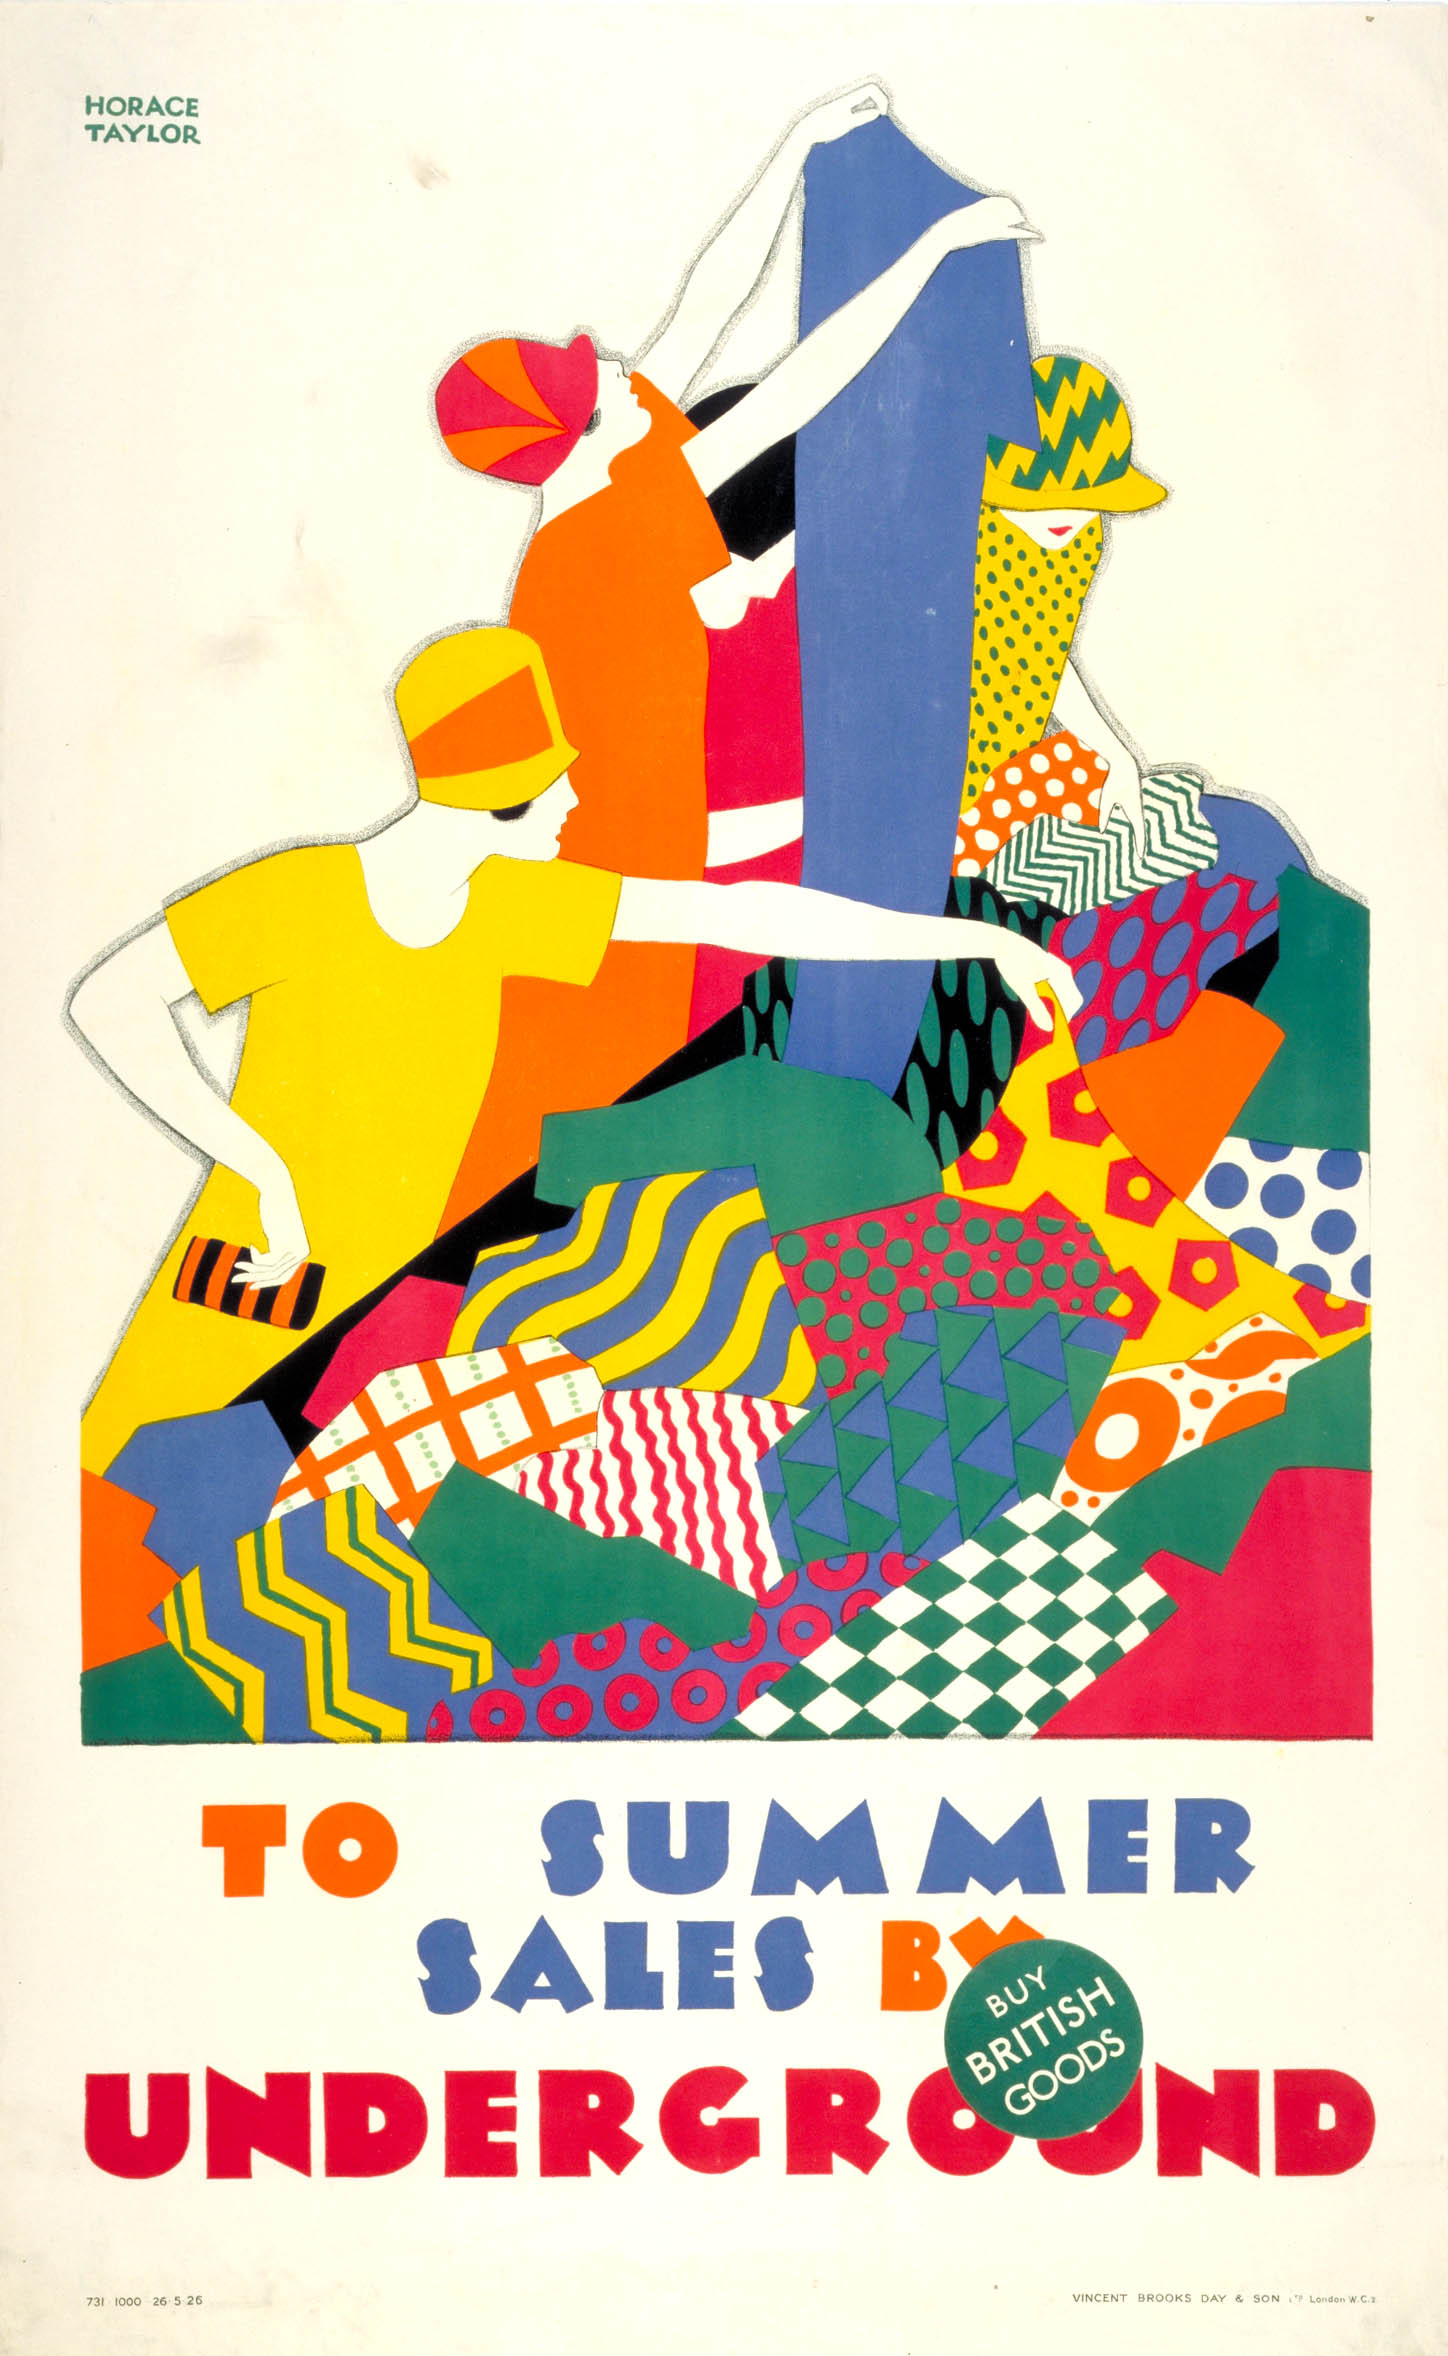 9 Classic Posters From The London Tube’s 150-Year History